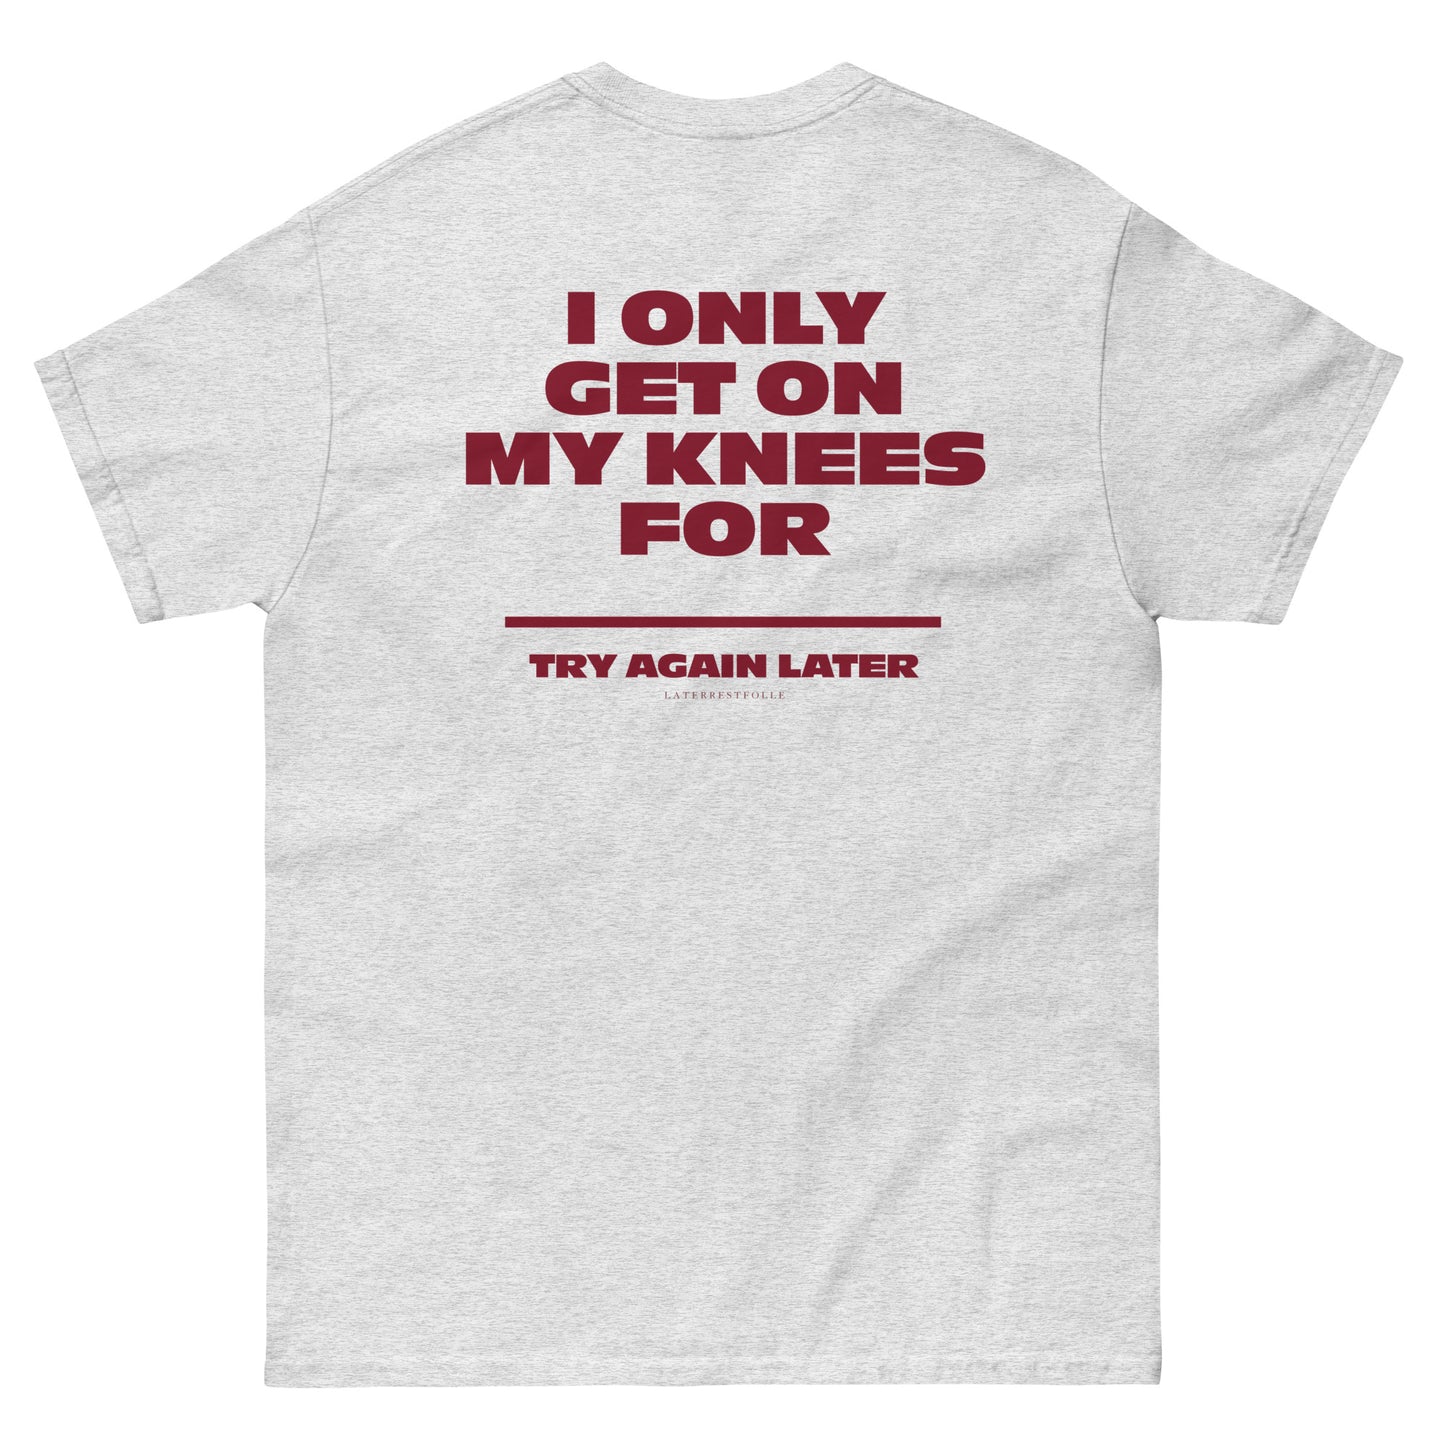 I ONLY GET ON MY KNEES FOR CUSTOMIZED T